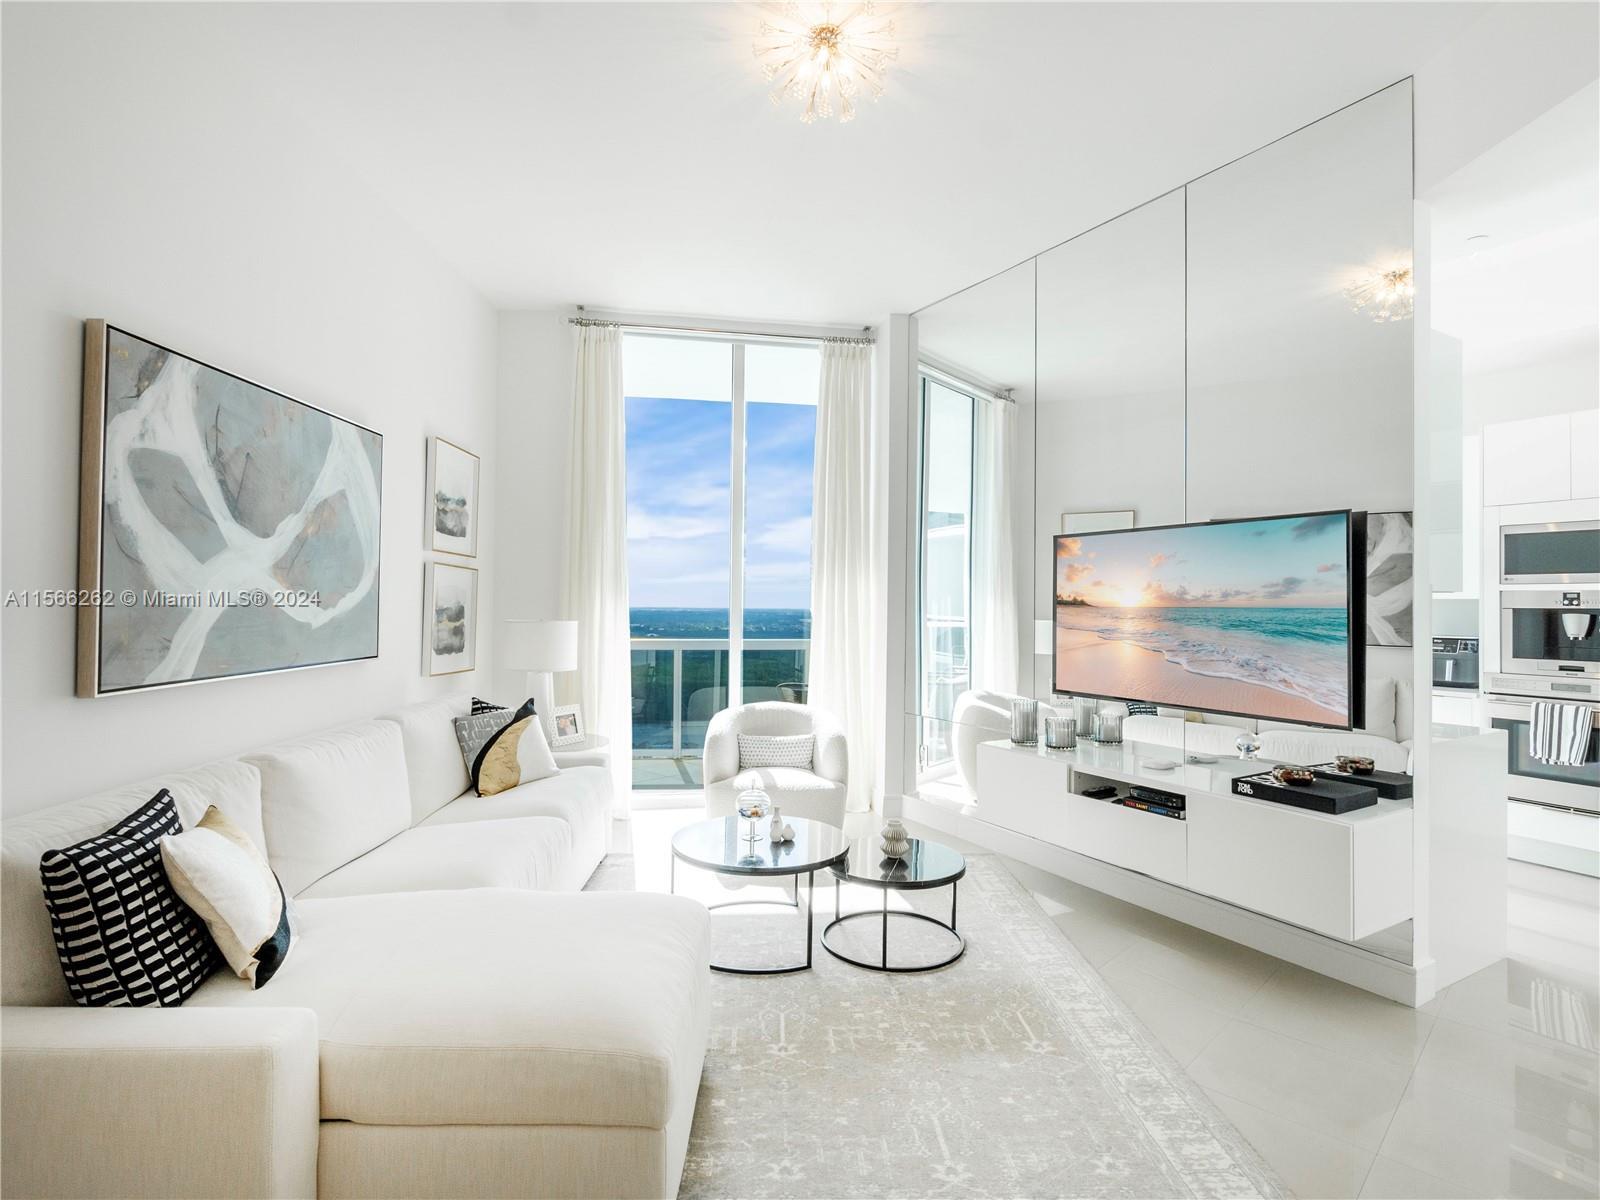 Stunning turn-key luxury residence sitting at the top of Trump Tower I in Sunny Isles Beach, luxurio